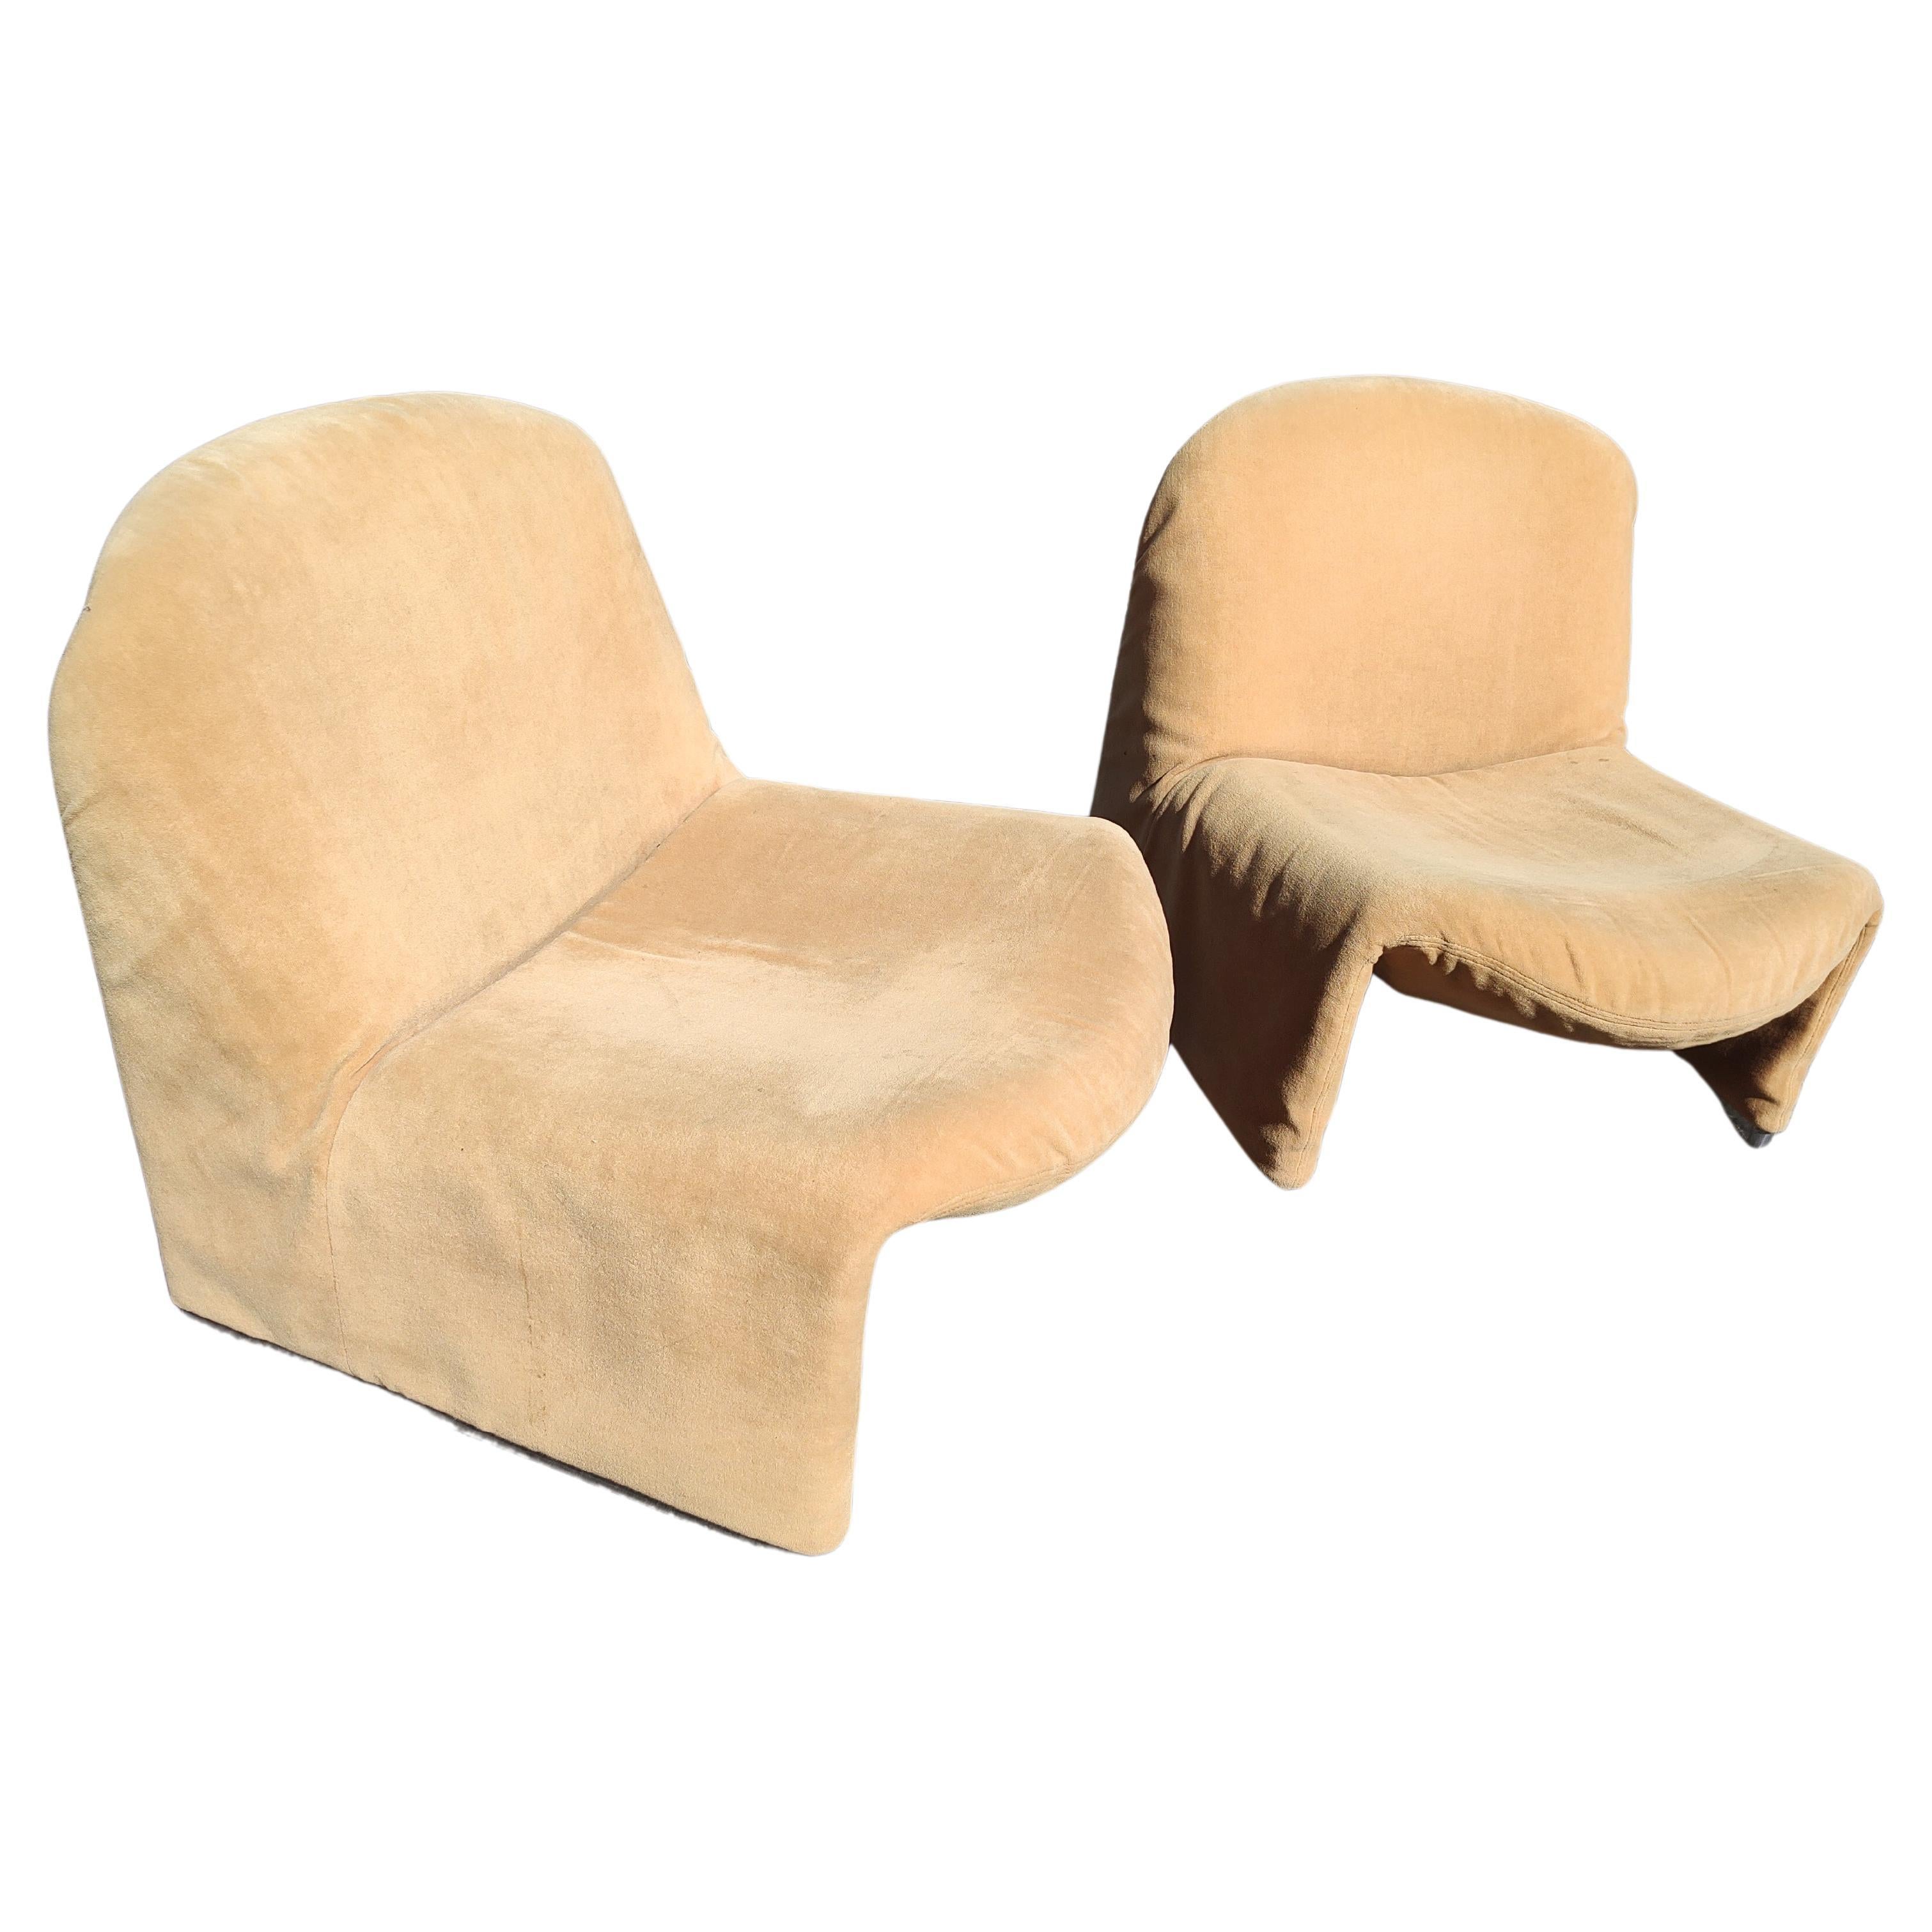 Pair of Mid Century Modern Alky Lounge Chairs Giancarlo Piretti for Artifort  For Sale